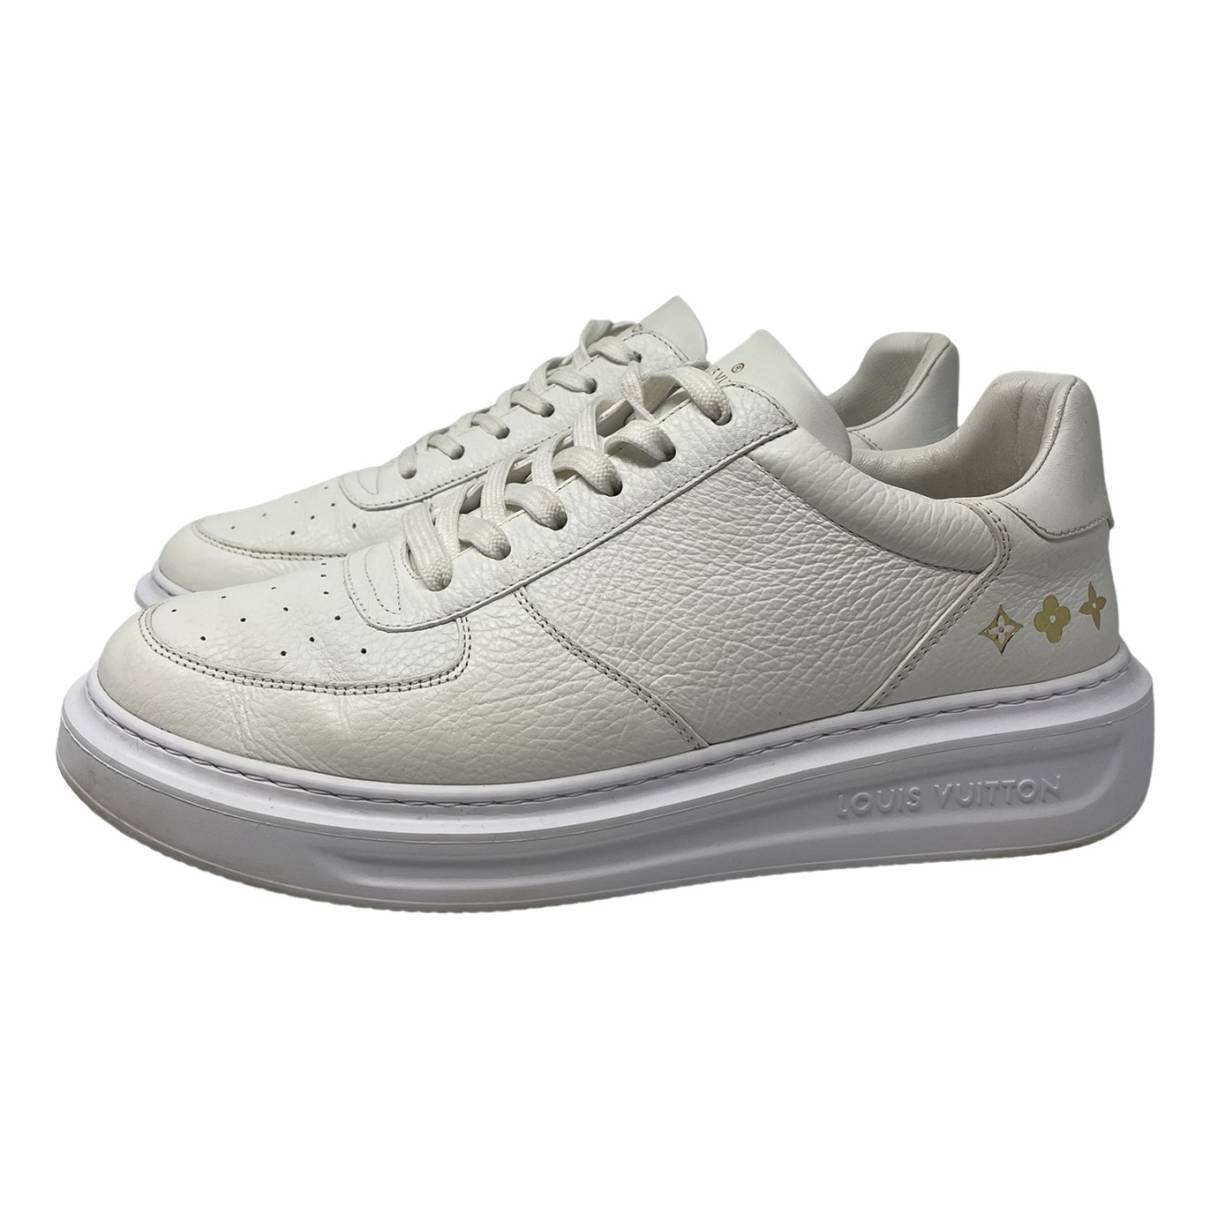 Beverly hills leather low trainers Louis Vuitton White size 7 UK